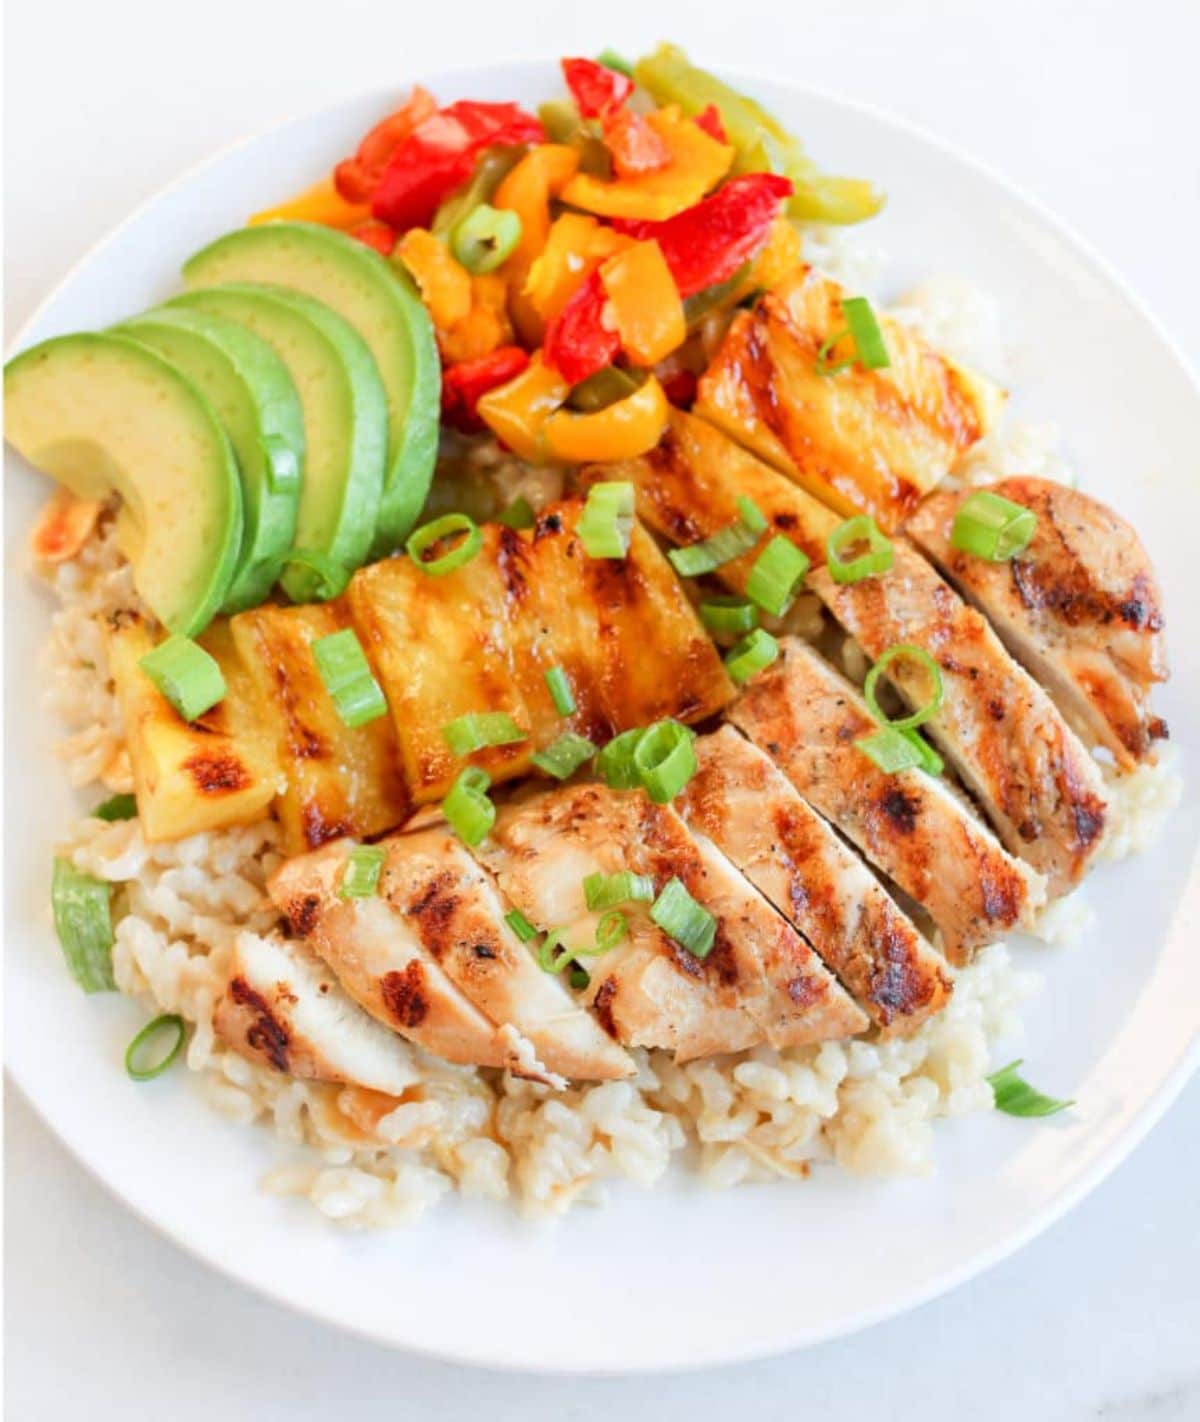 Healthy grilled hawaiian chicken with veggies and rice on a white plate.